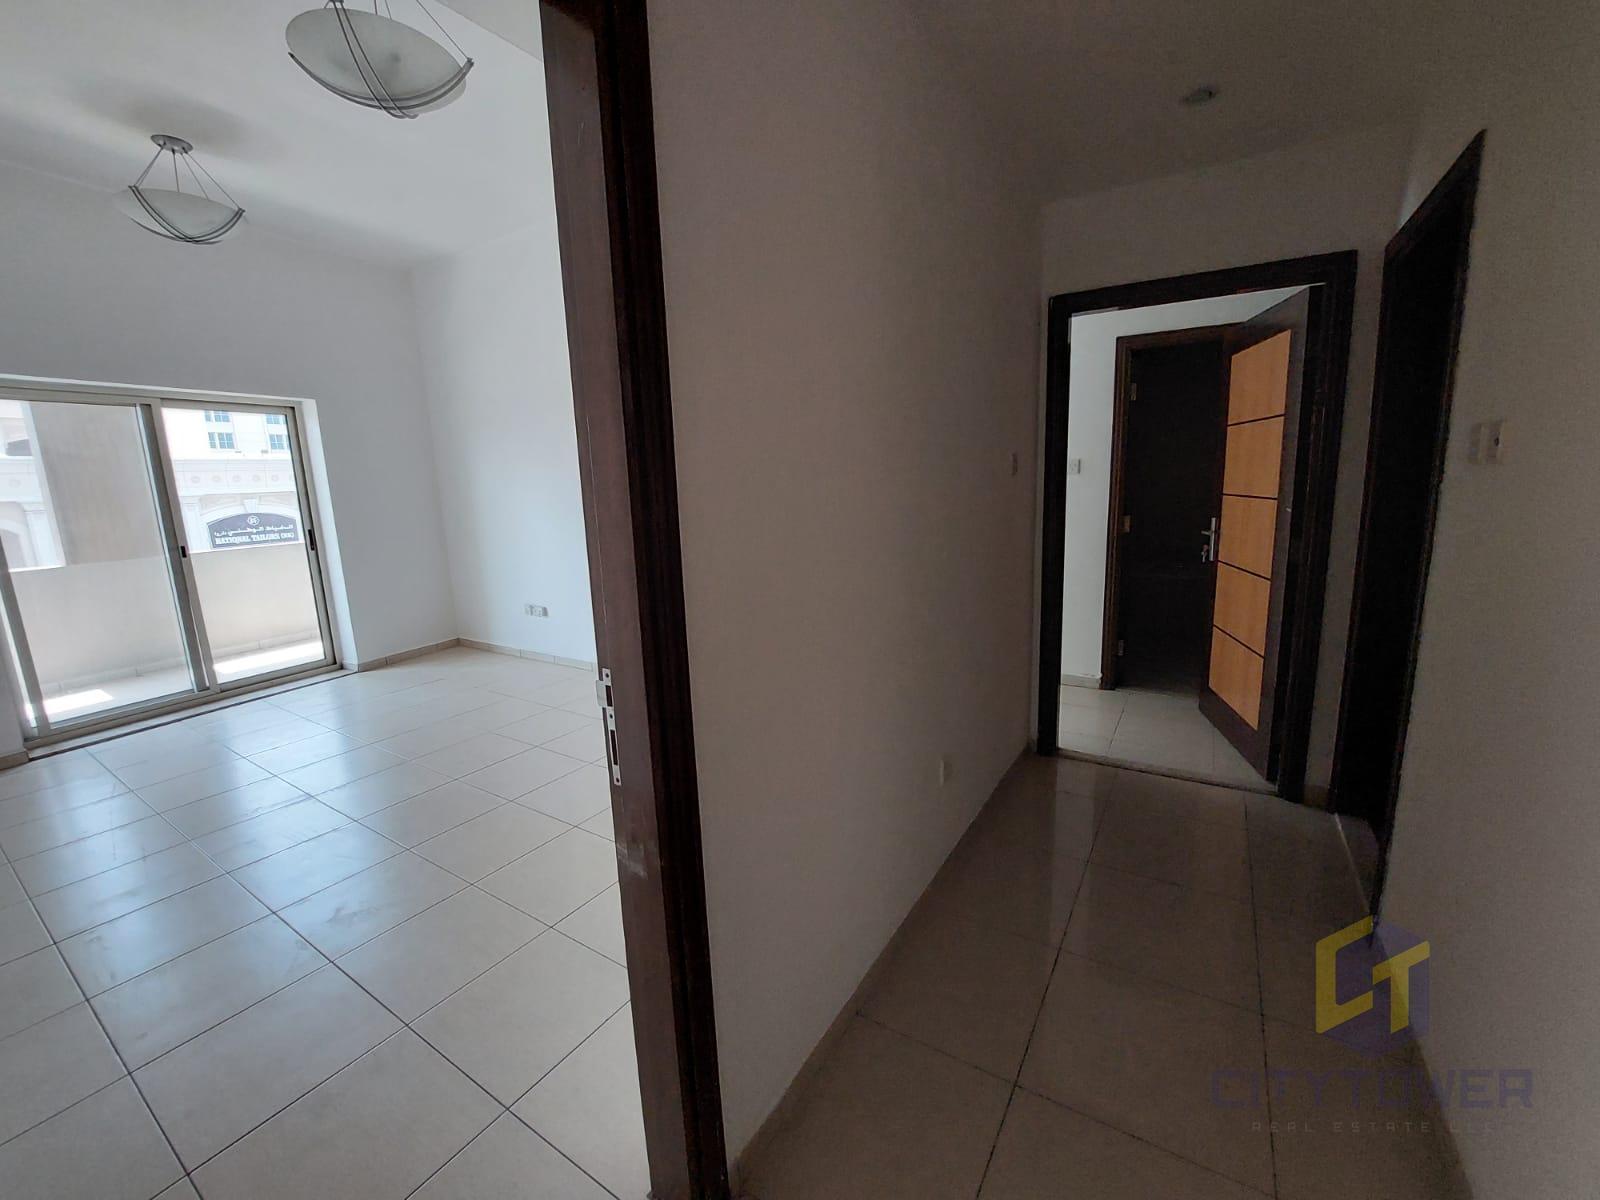 Real Estate_Apartments for Rent_JBR Jumeirah Beach Residence